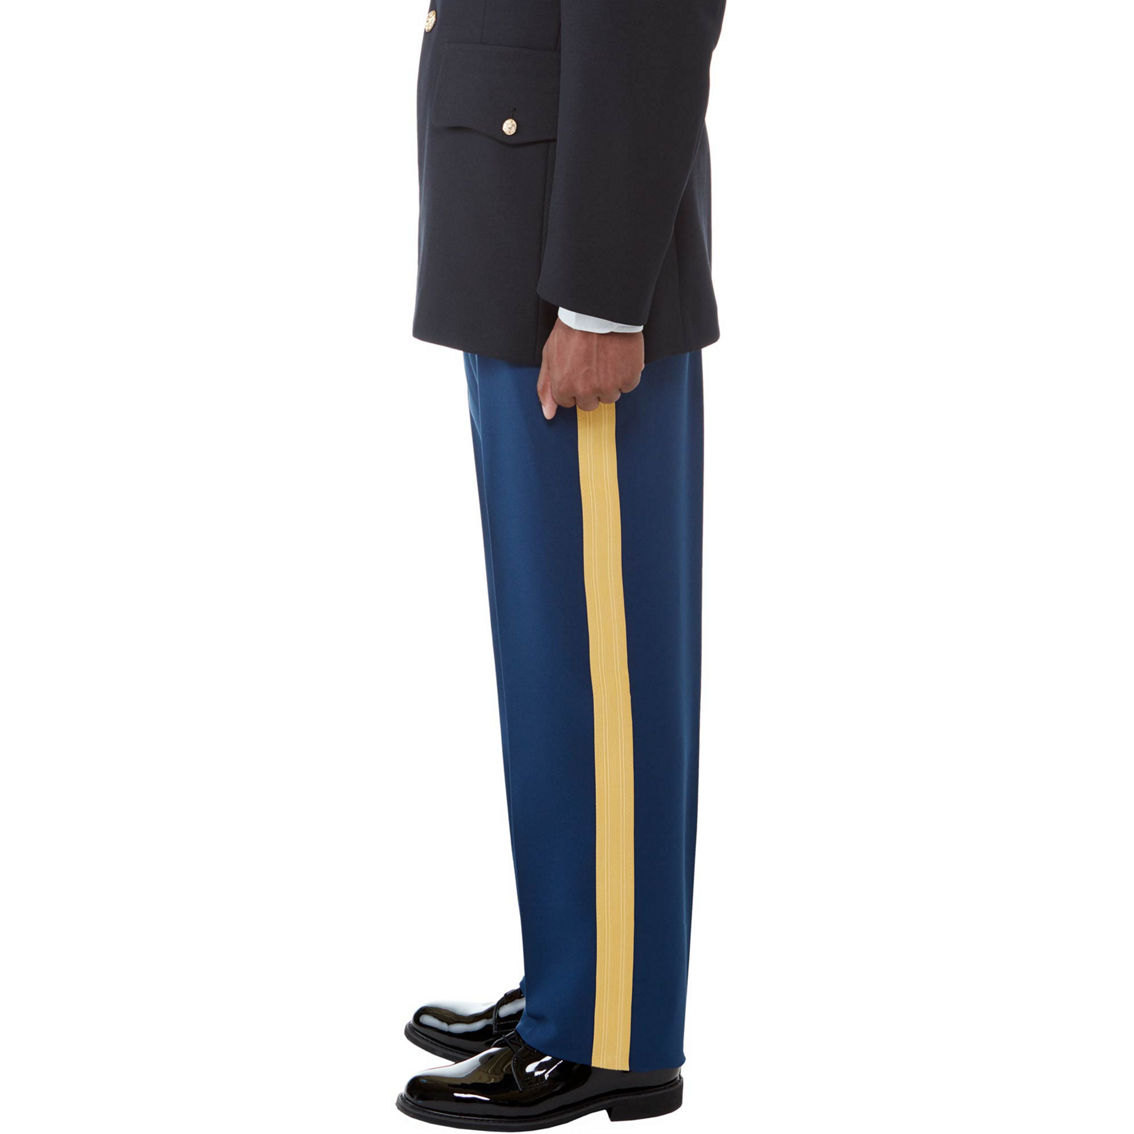 Army Senior NCO and Officer Trousers with Gold Braid AB 451 (ASU) - Image 4 of 4